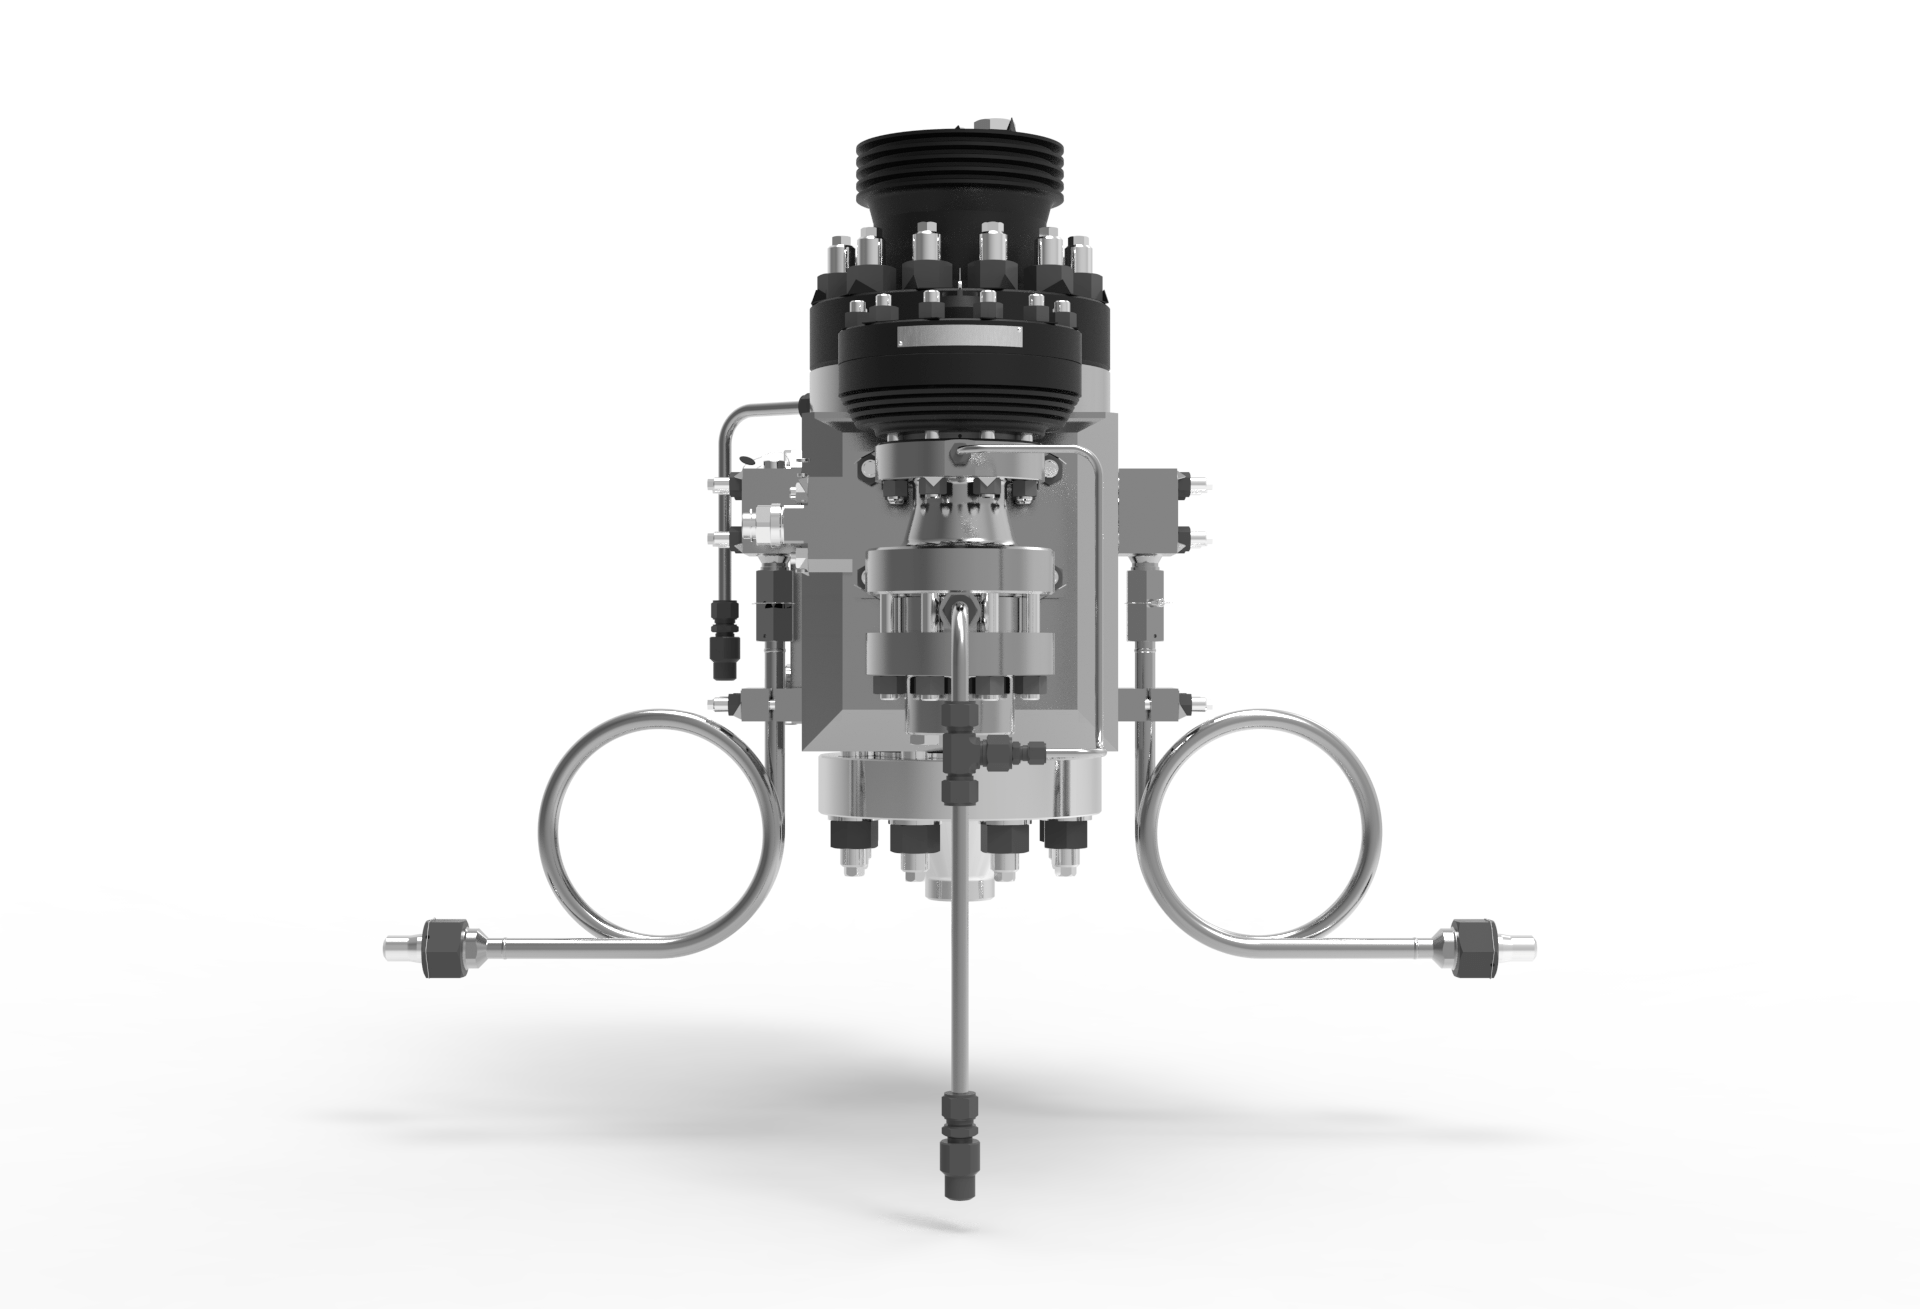 Front view of a SEBIM CSSV 3000 Compact Single Safety Valve manufactured by Trillium Flow Technologies